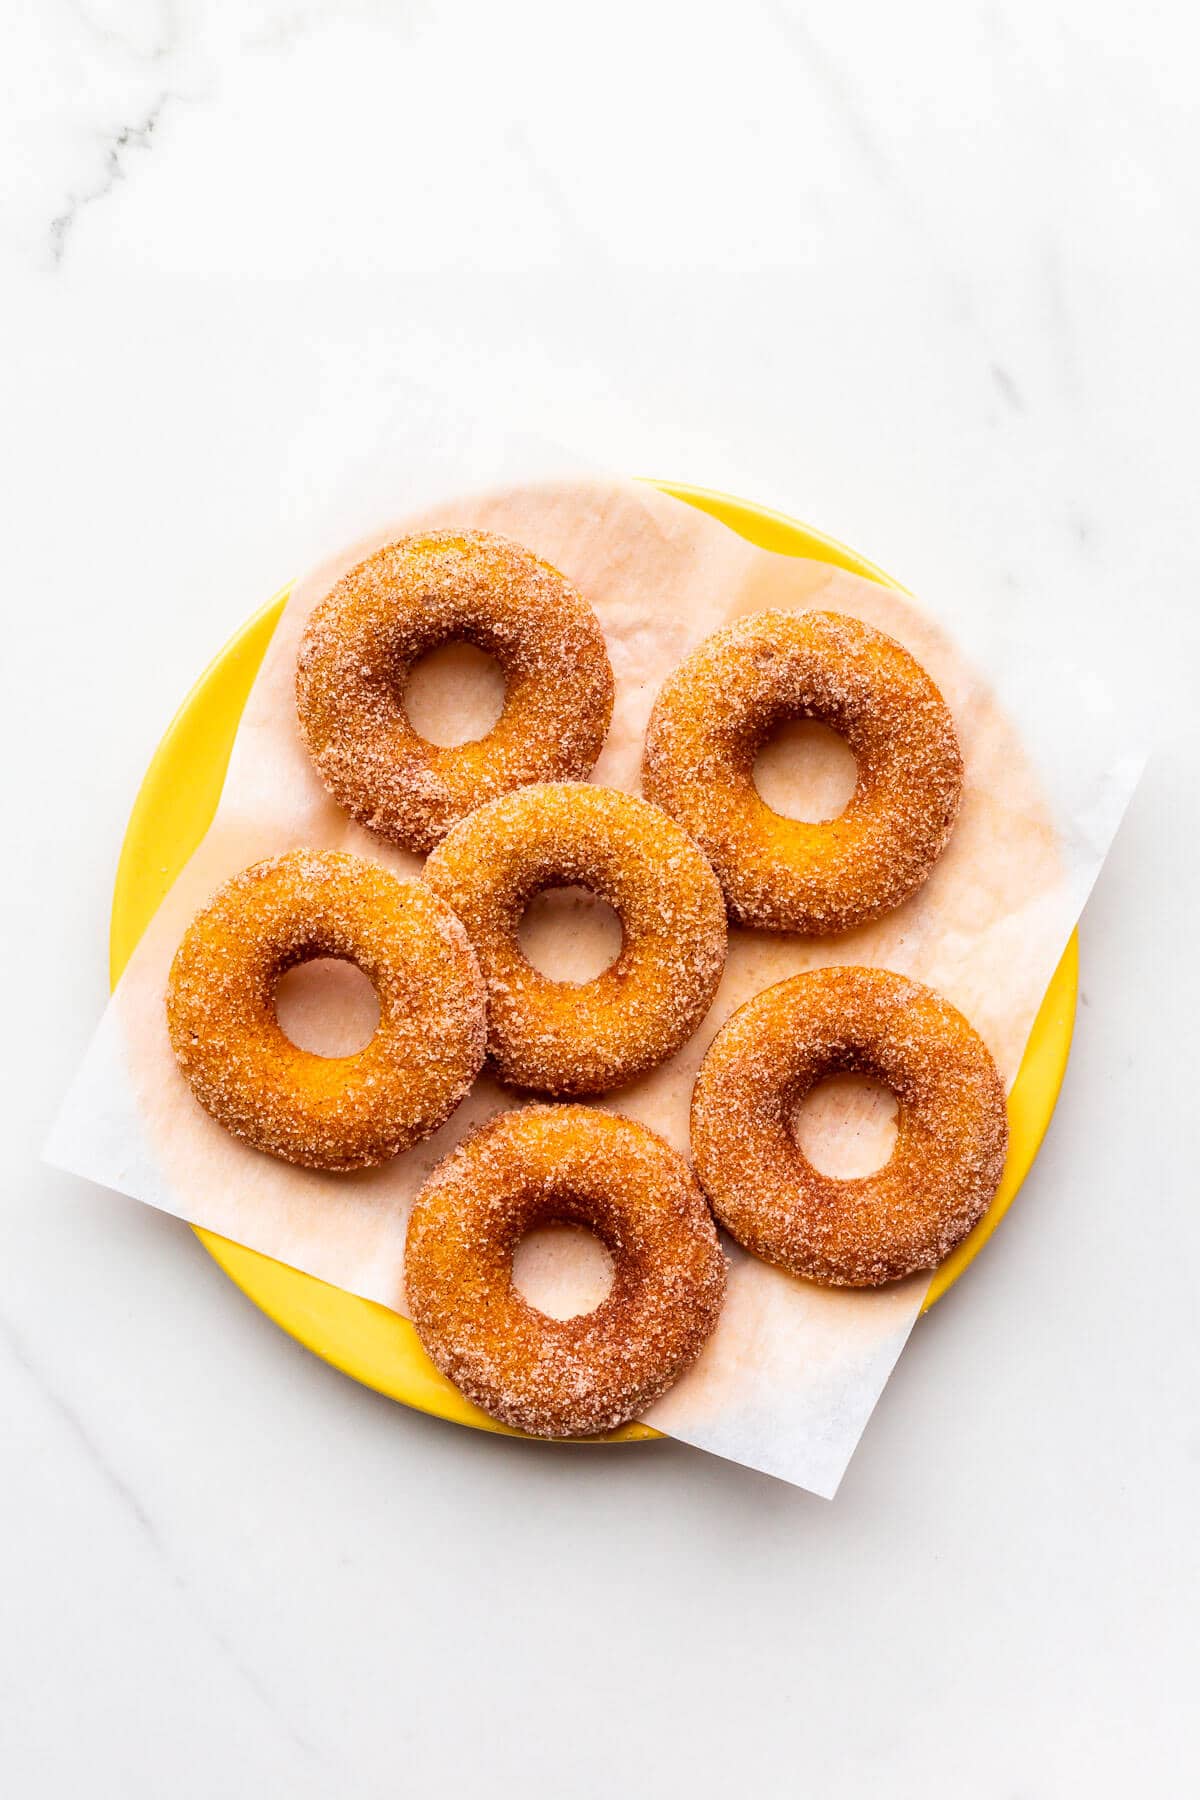 A yellow plate of baked pumpkin donuts coated in cinnamon sugar.